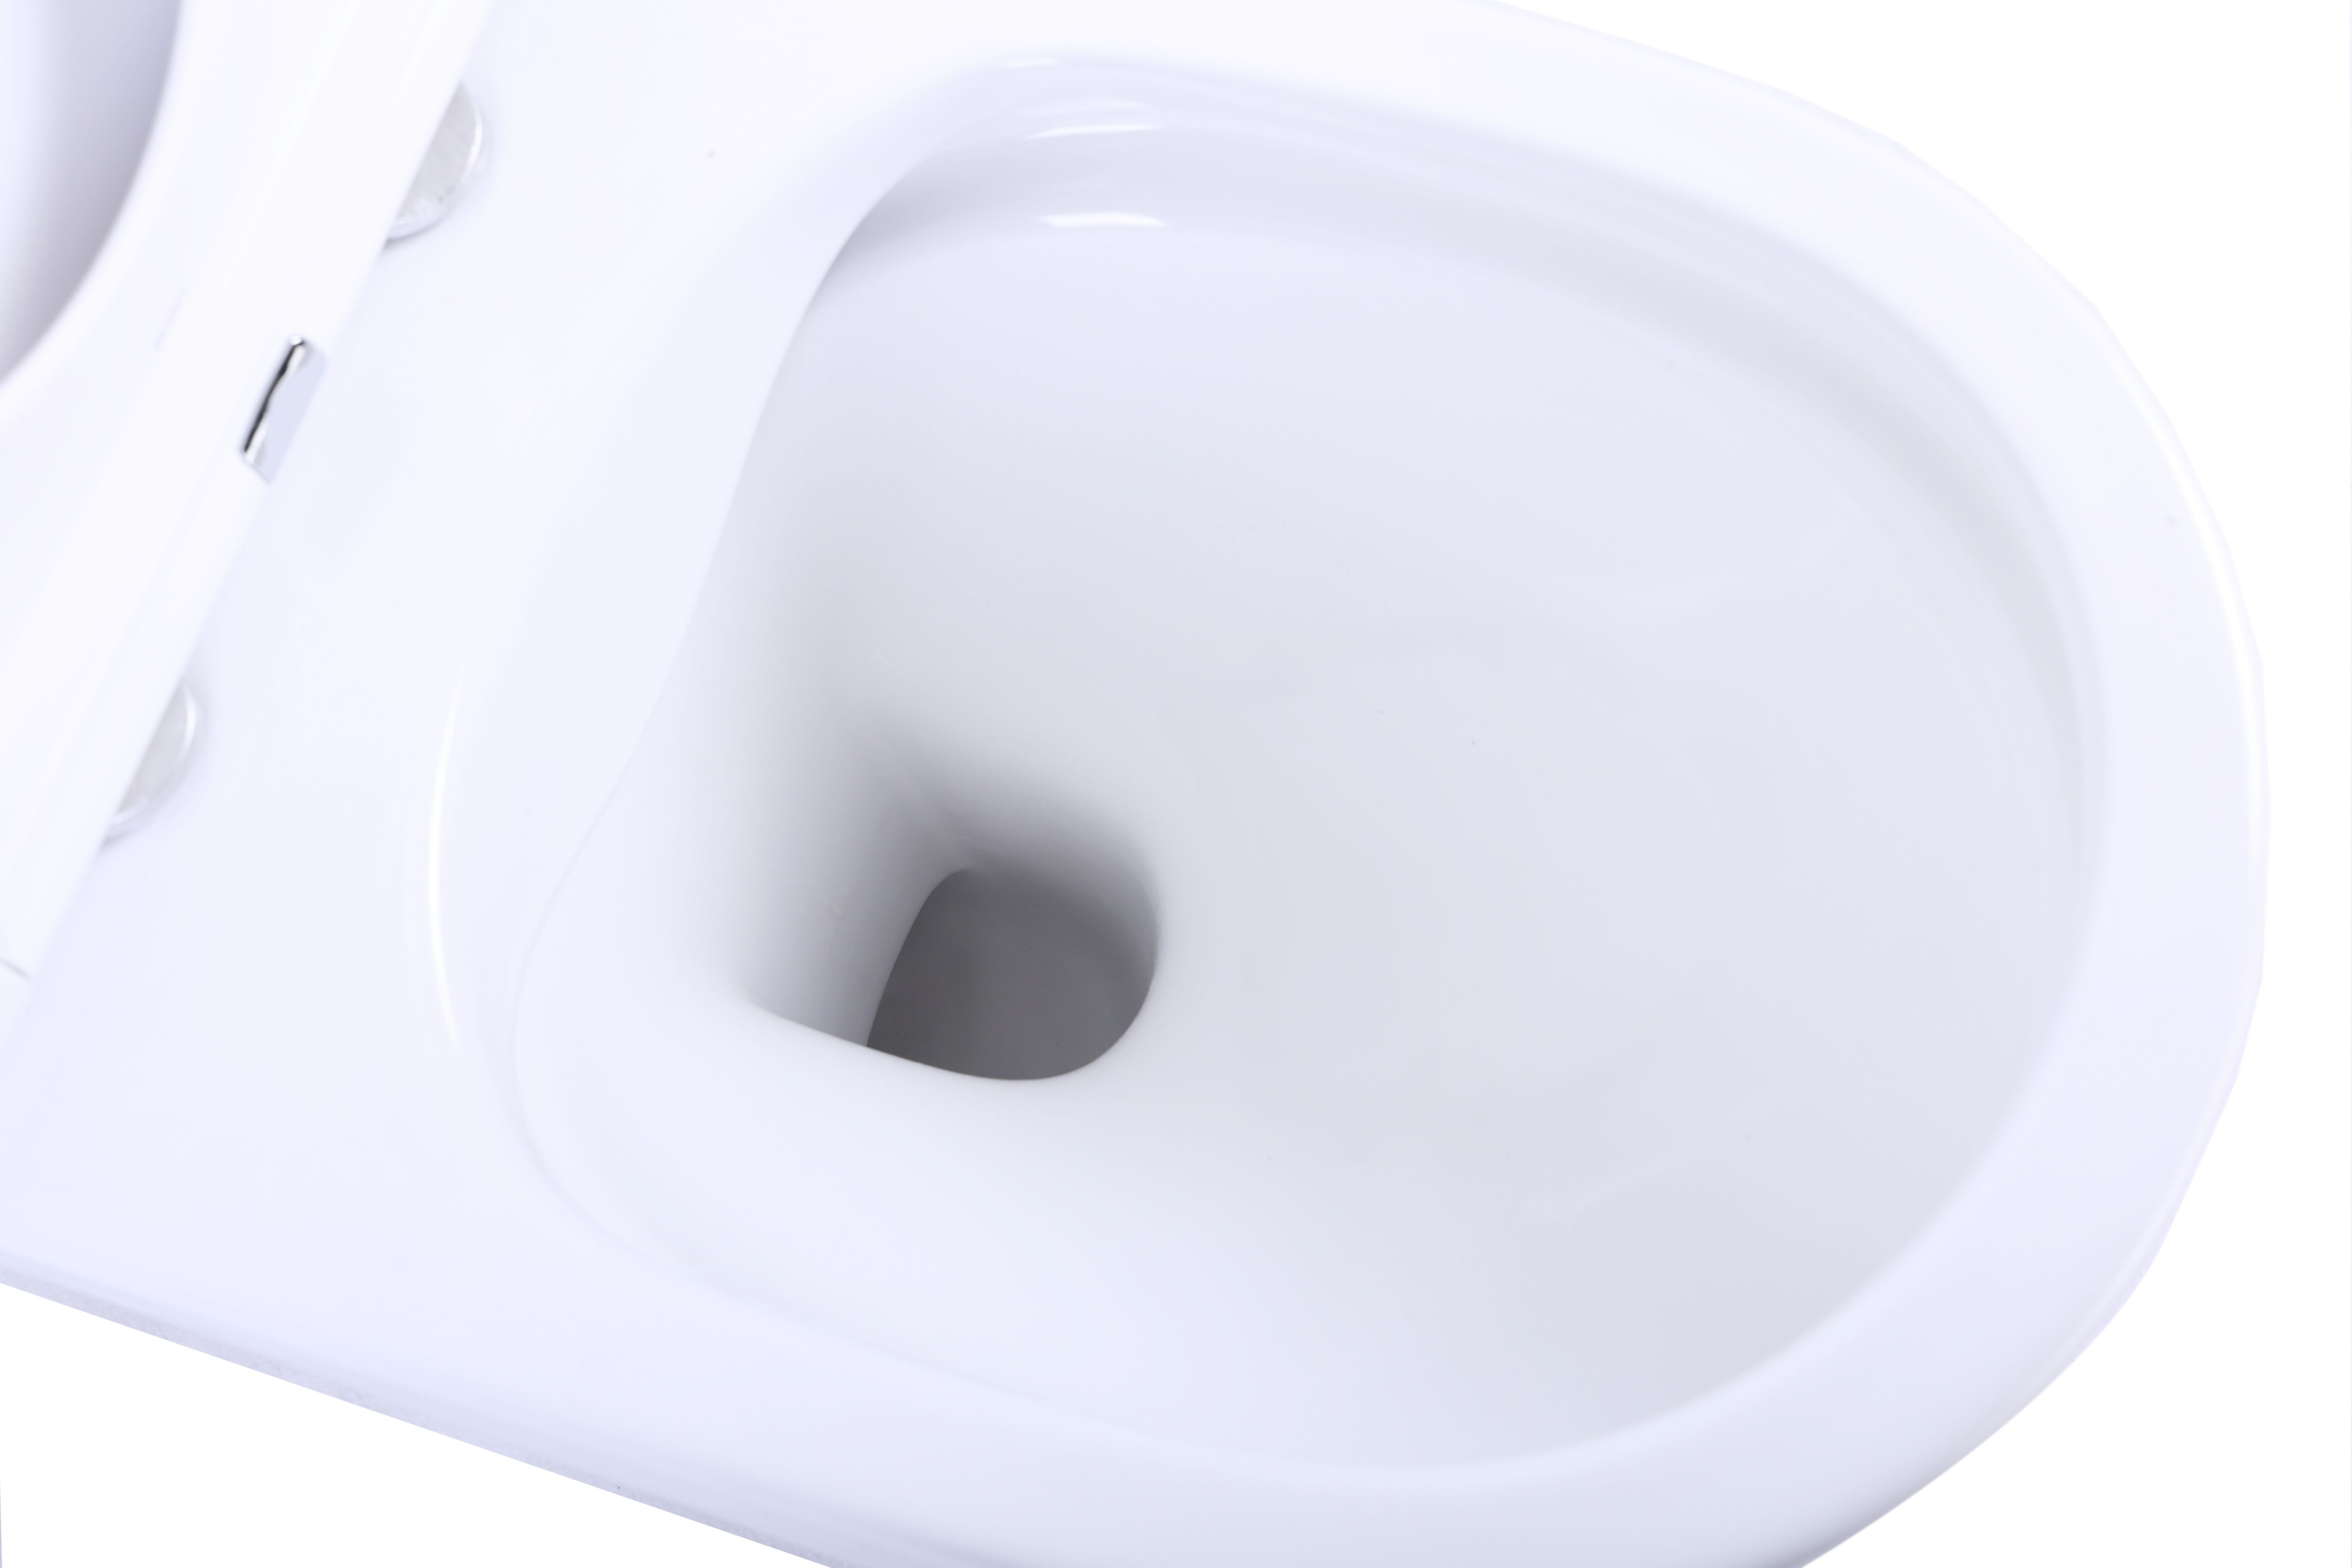 GoodHome Cavally White Close-coupled Toilet, basin & tap pack (W)885mm (H)381mm